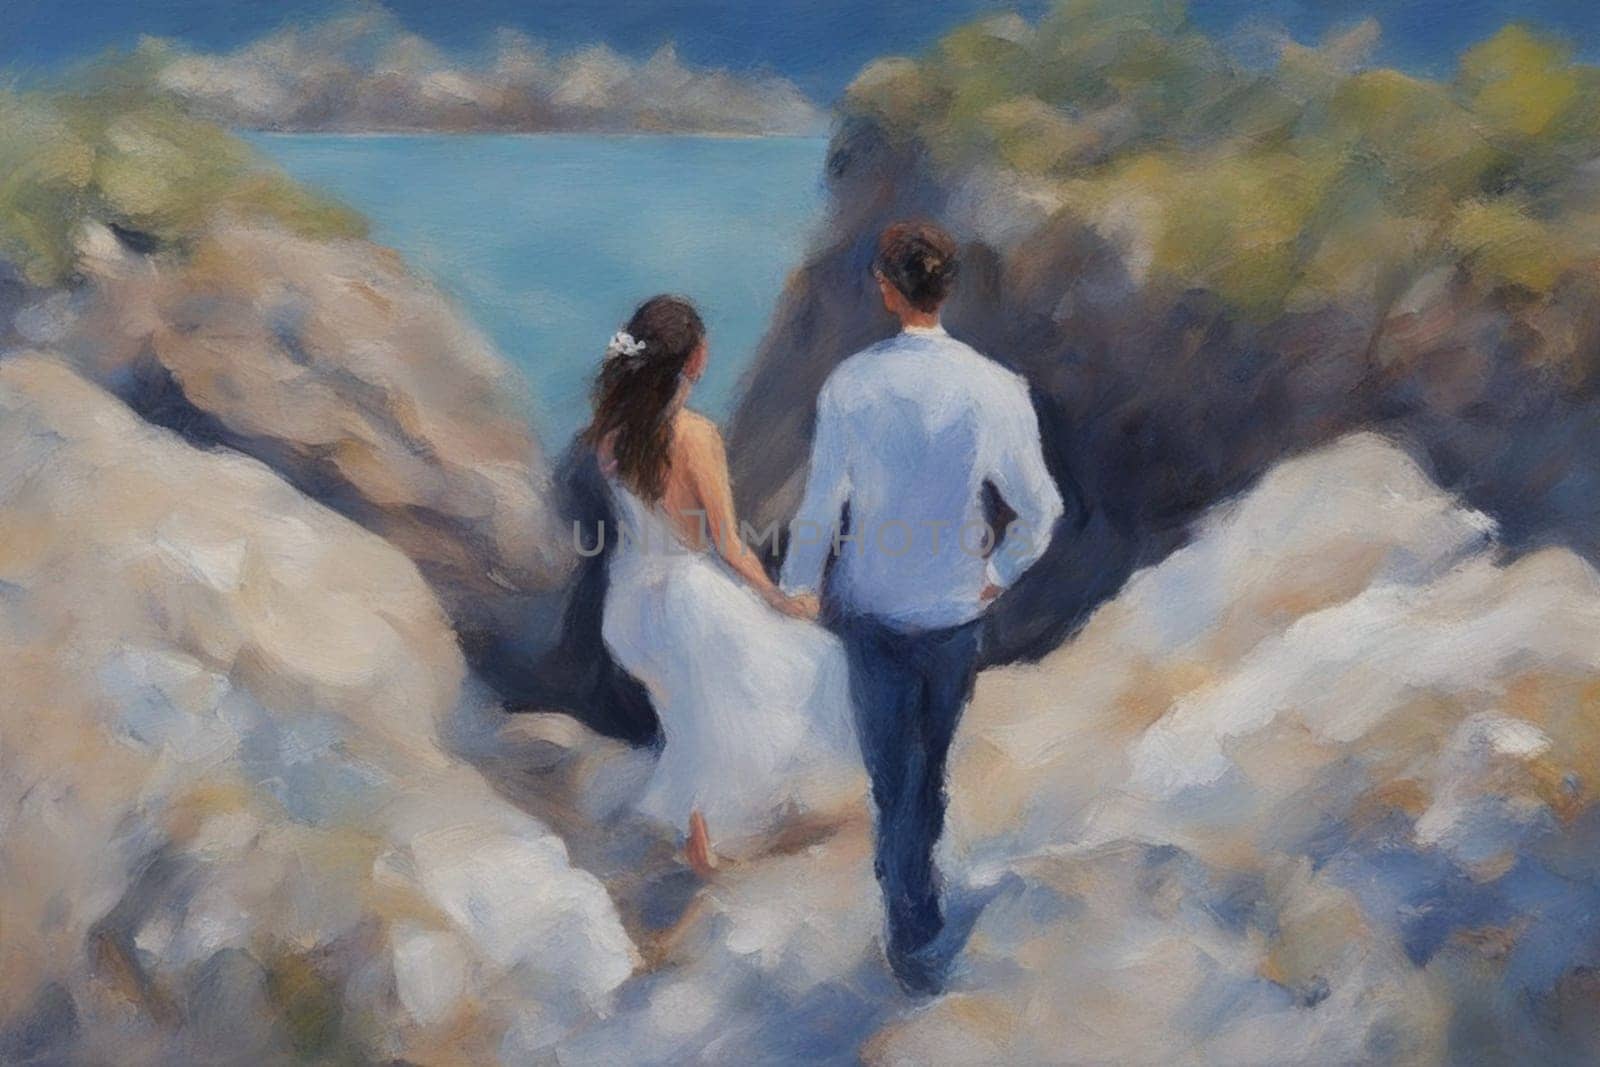 heterosexual couple walking by hand in the beach, romantic valentine painting illustration by verbano